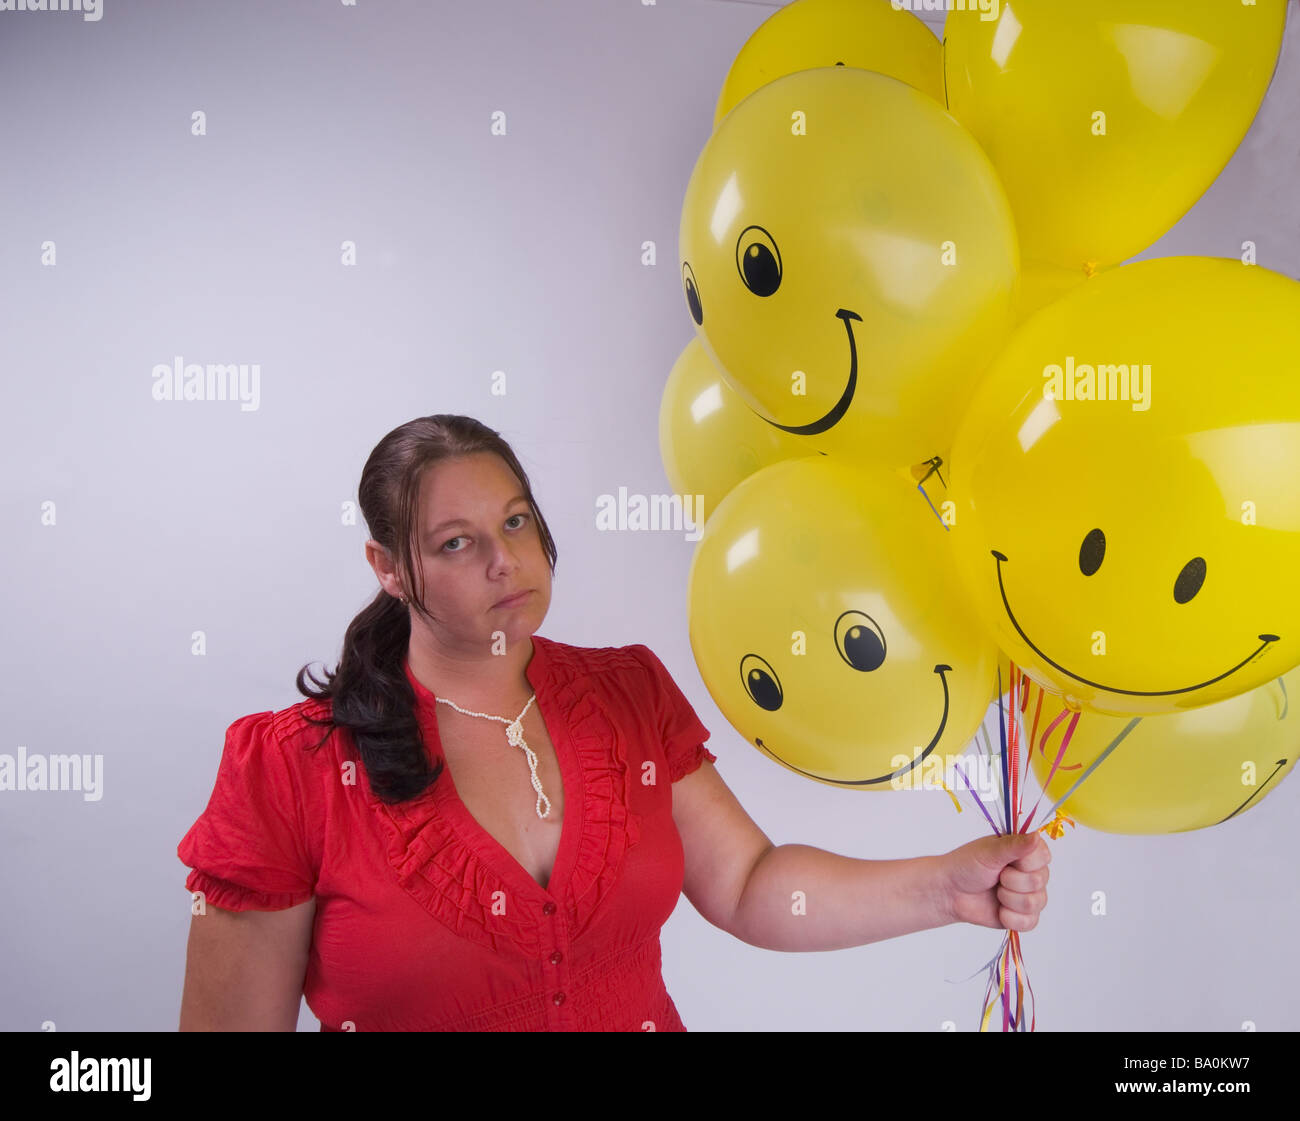 Sad woman with balloons Banque D'Images